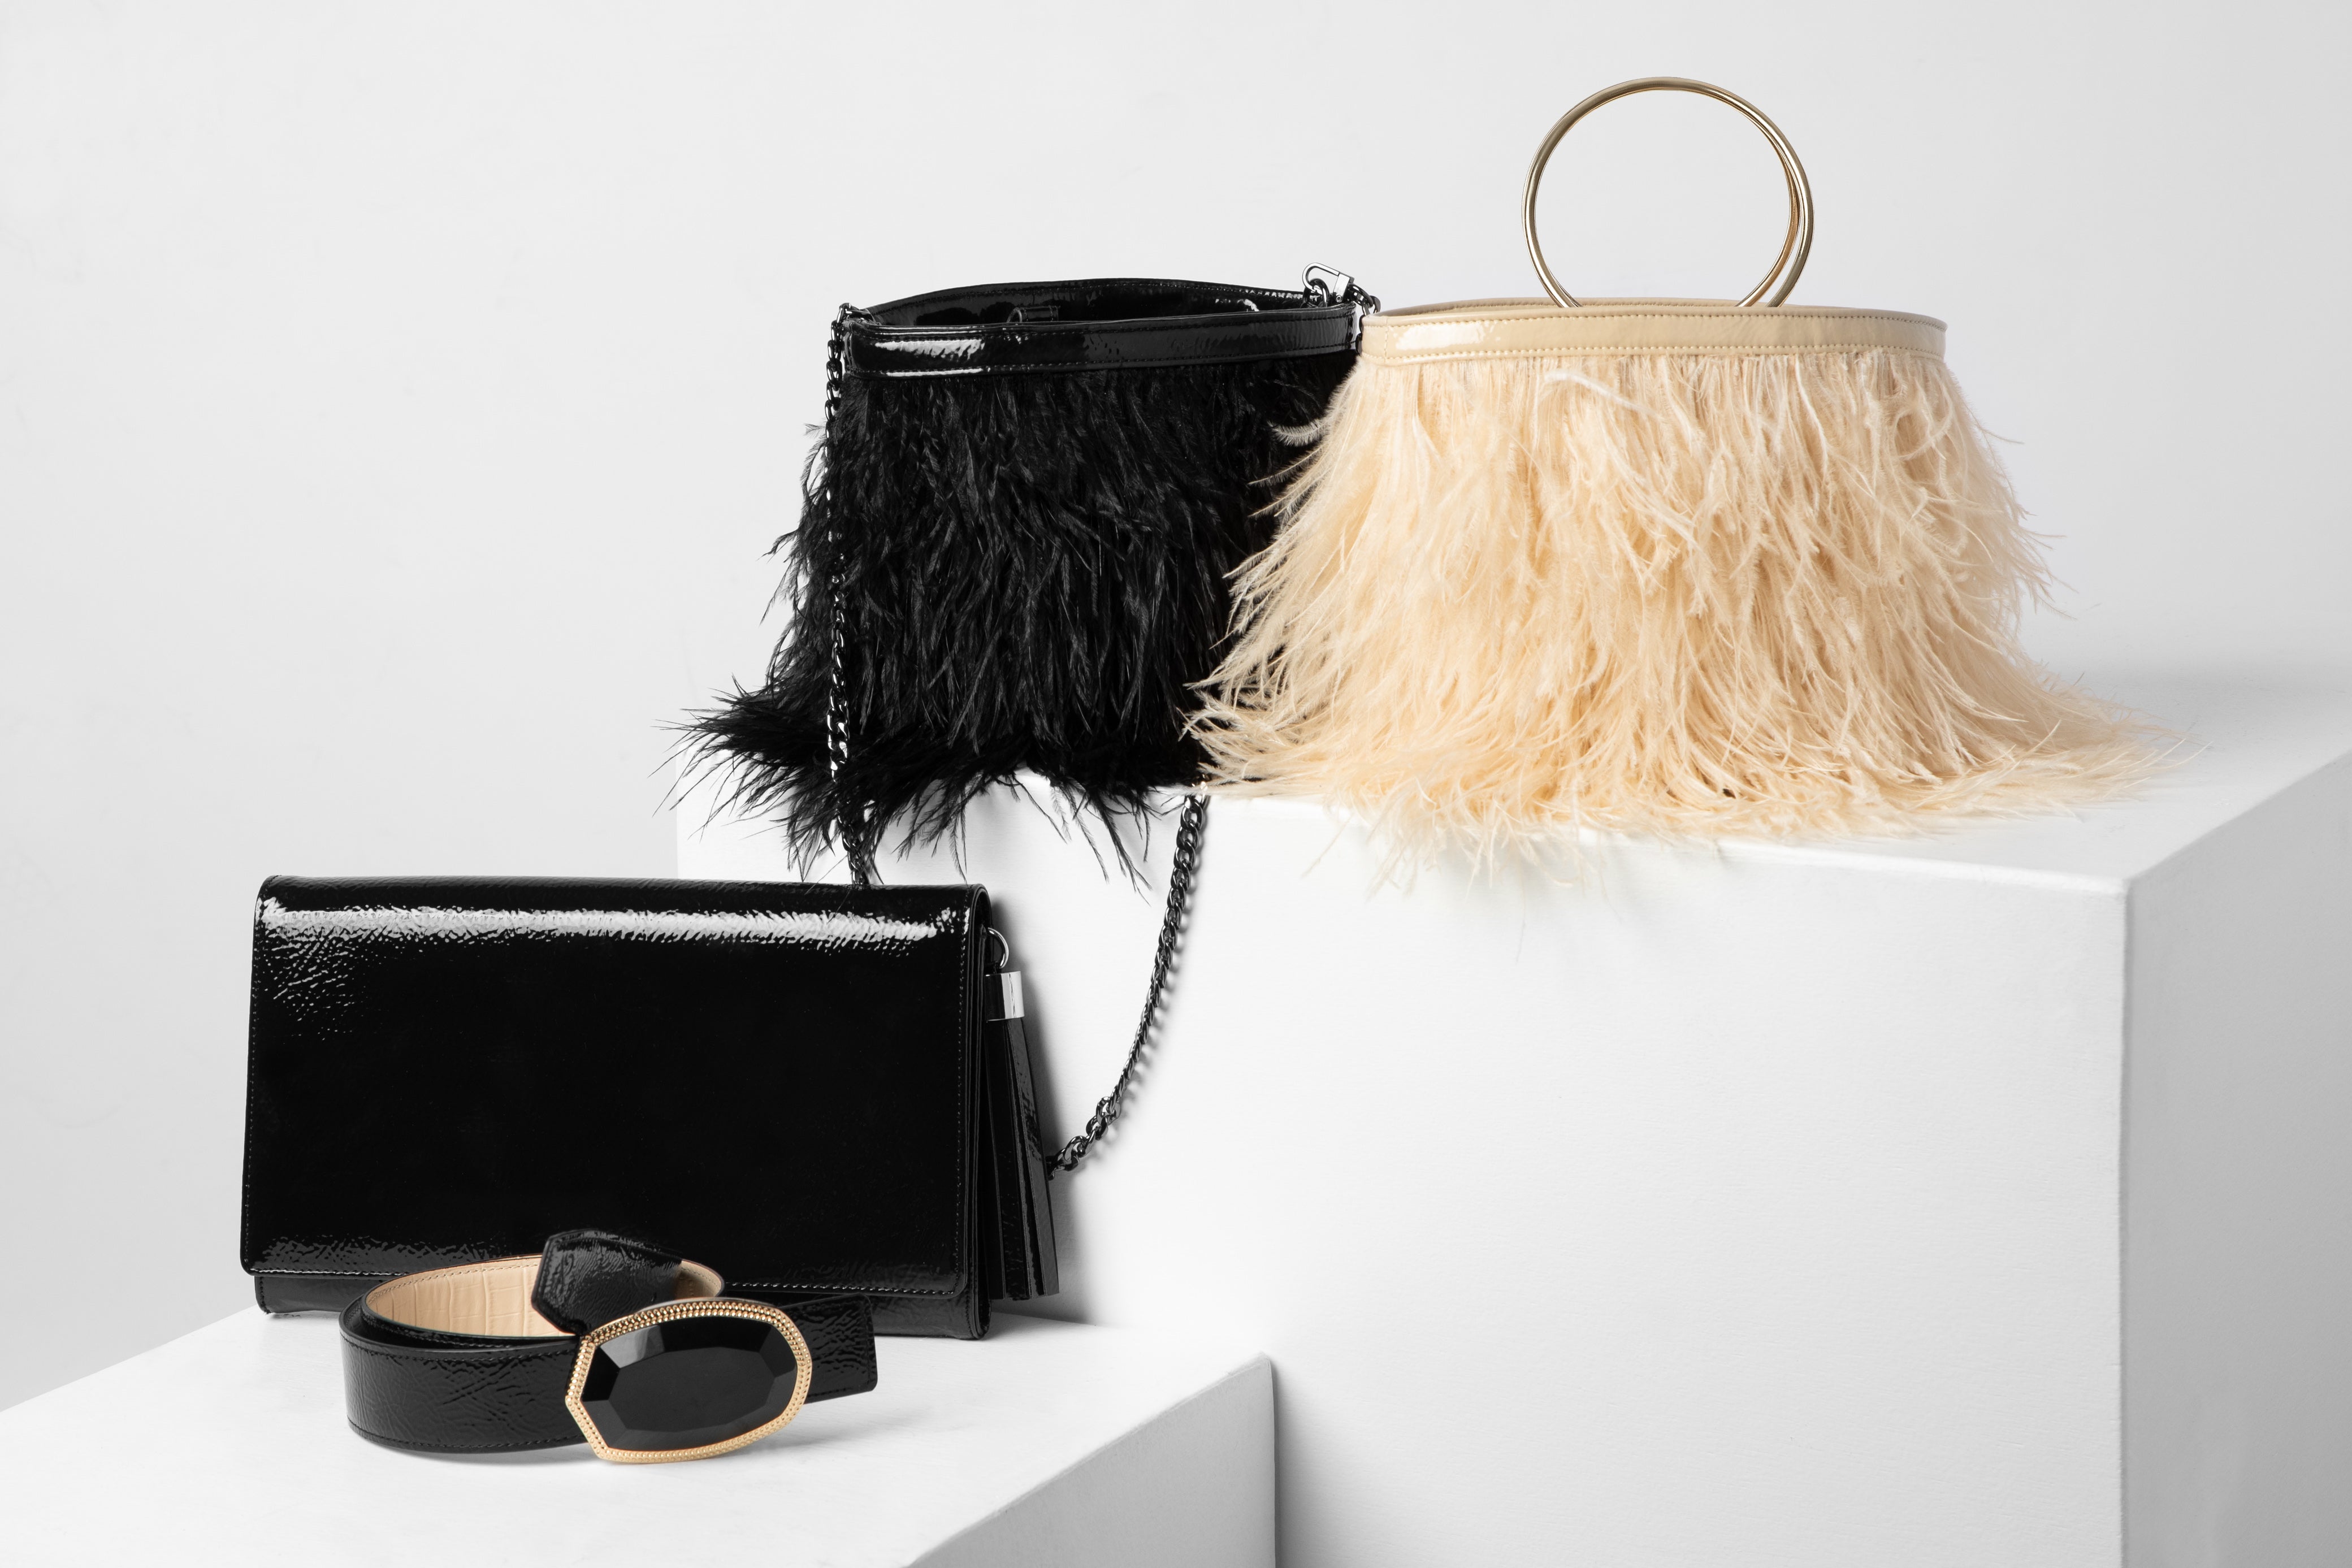 Topshop Frosty Black Feather Grab Bag